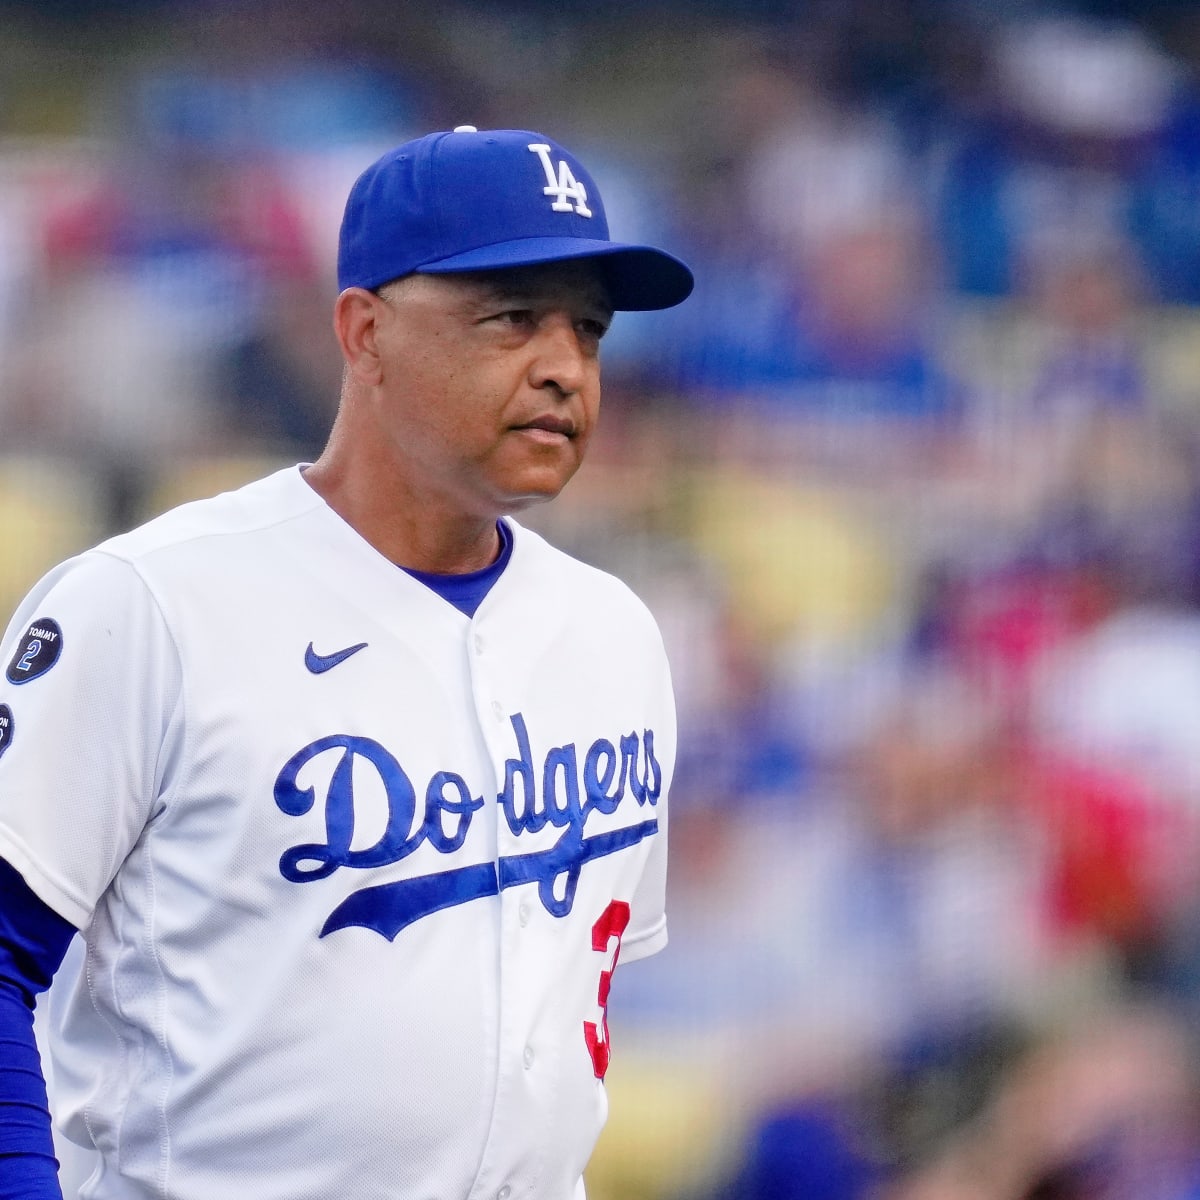 Los Angeles Dodgers' Dave Roberts likely wouldn't go to White House